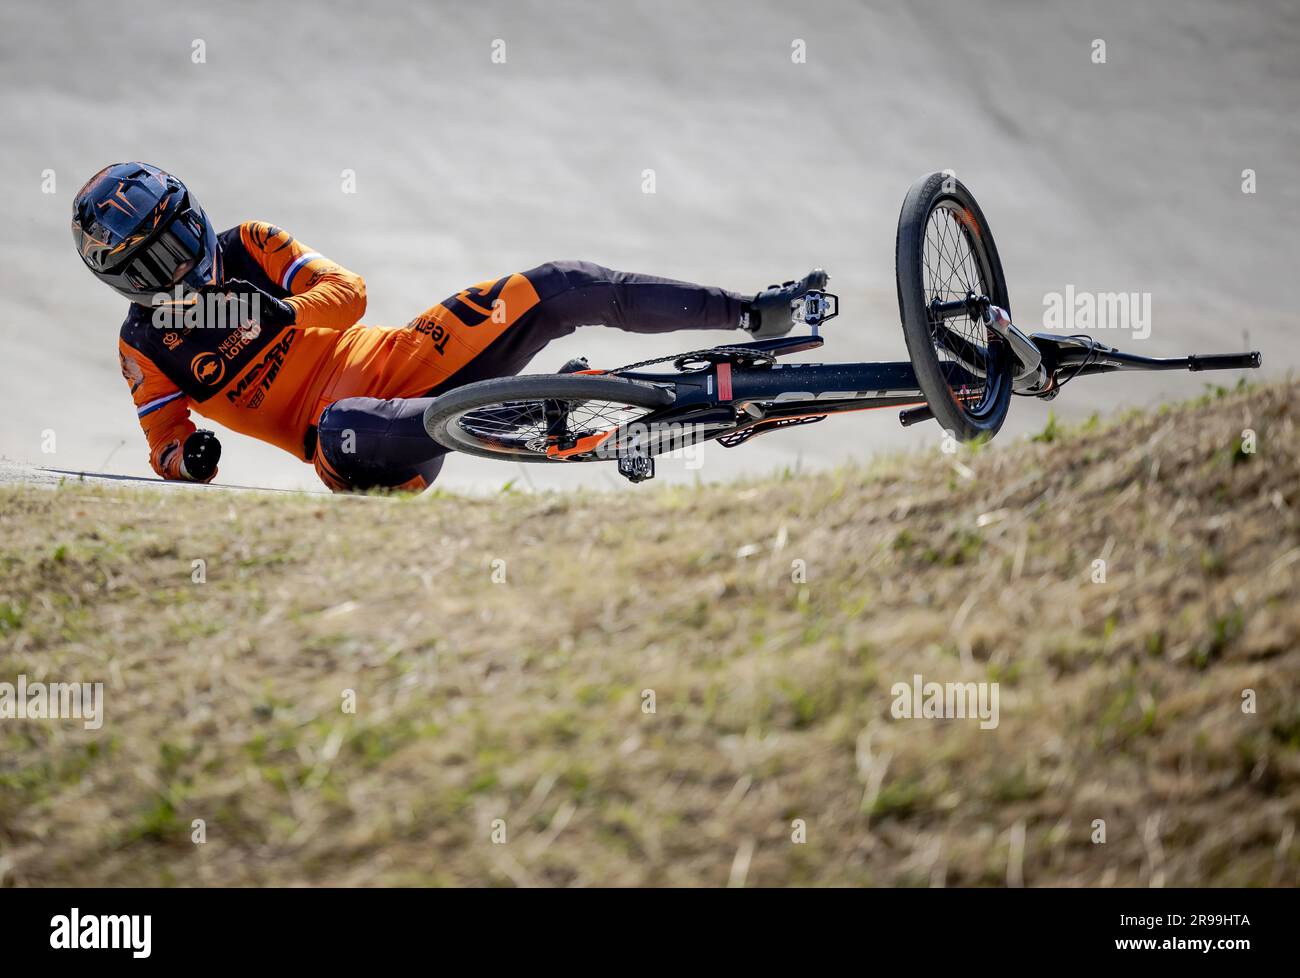 ARNHEM - Judy Baauw in action during the fourth round of the BMX World Cup.  ANP ROBIN VAN LONKHUIJSEN netherlands out - belgium out Stock Photo - Alamy